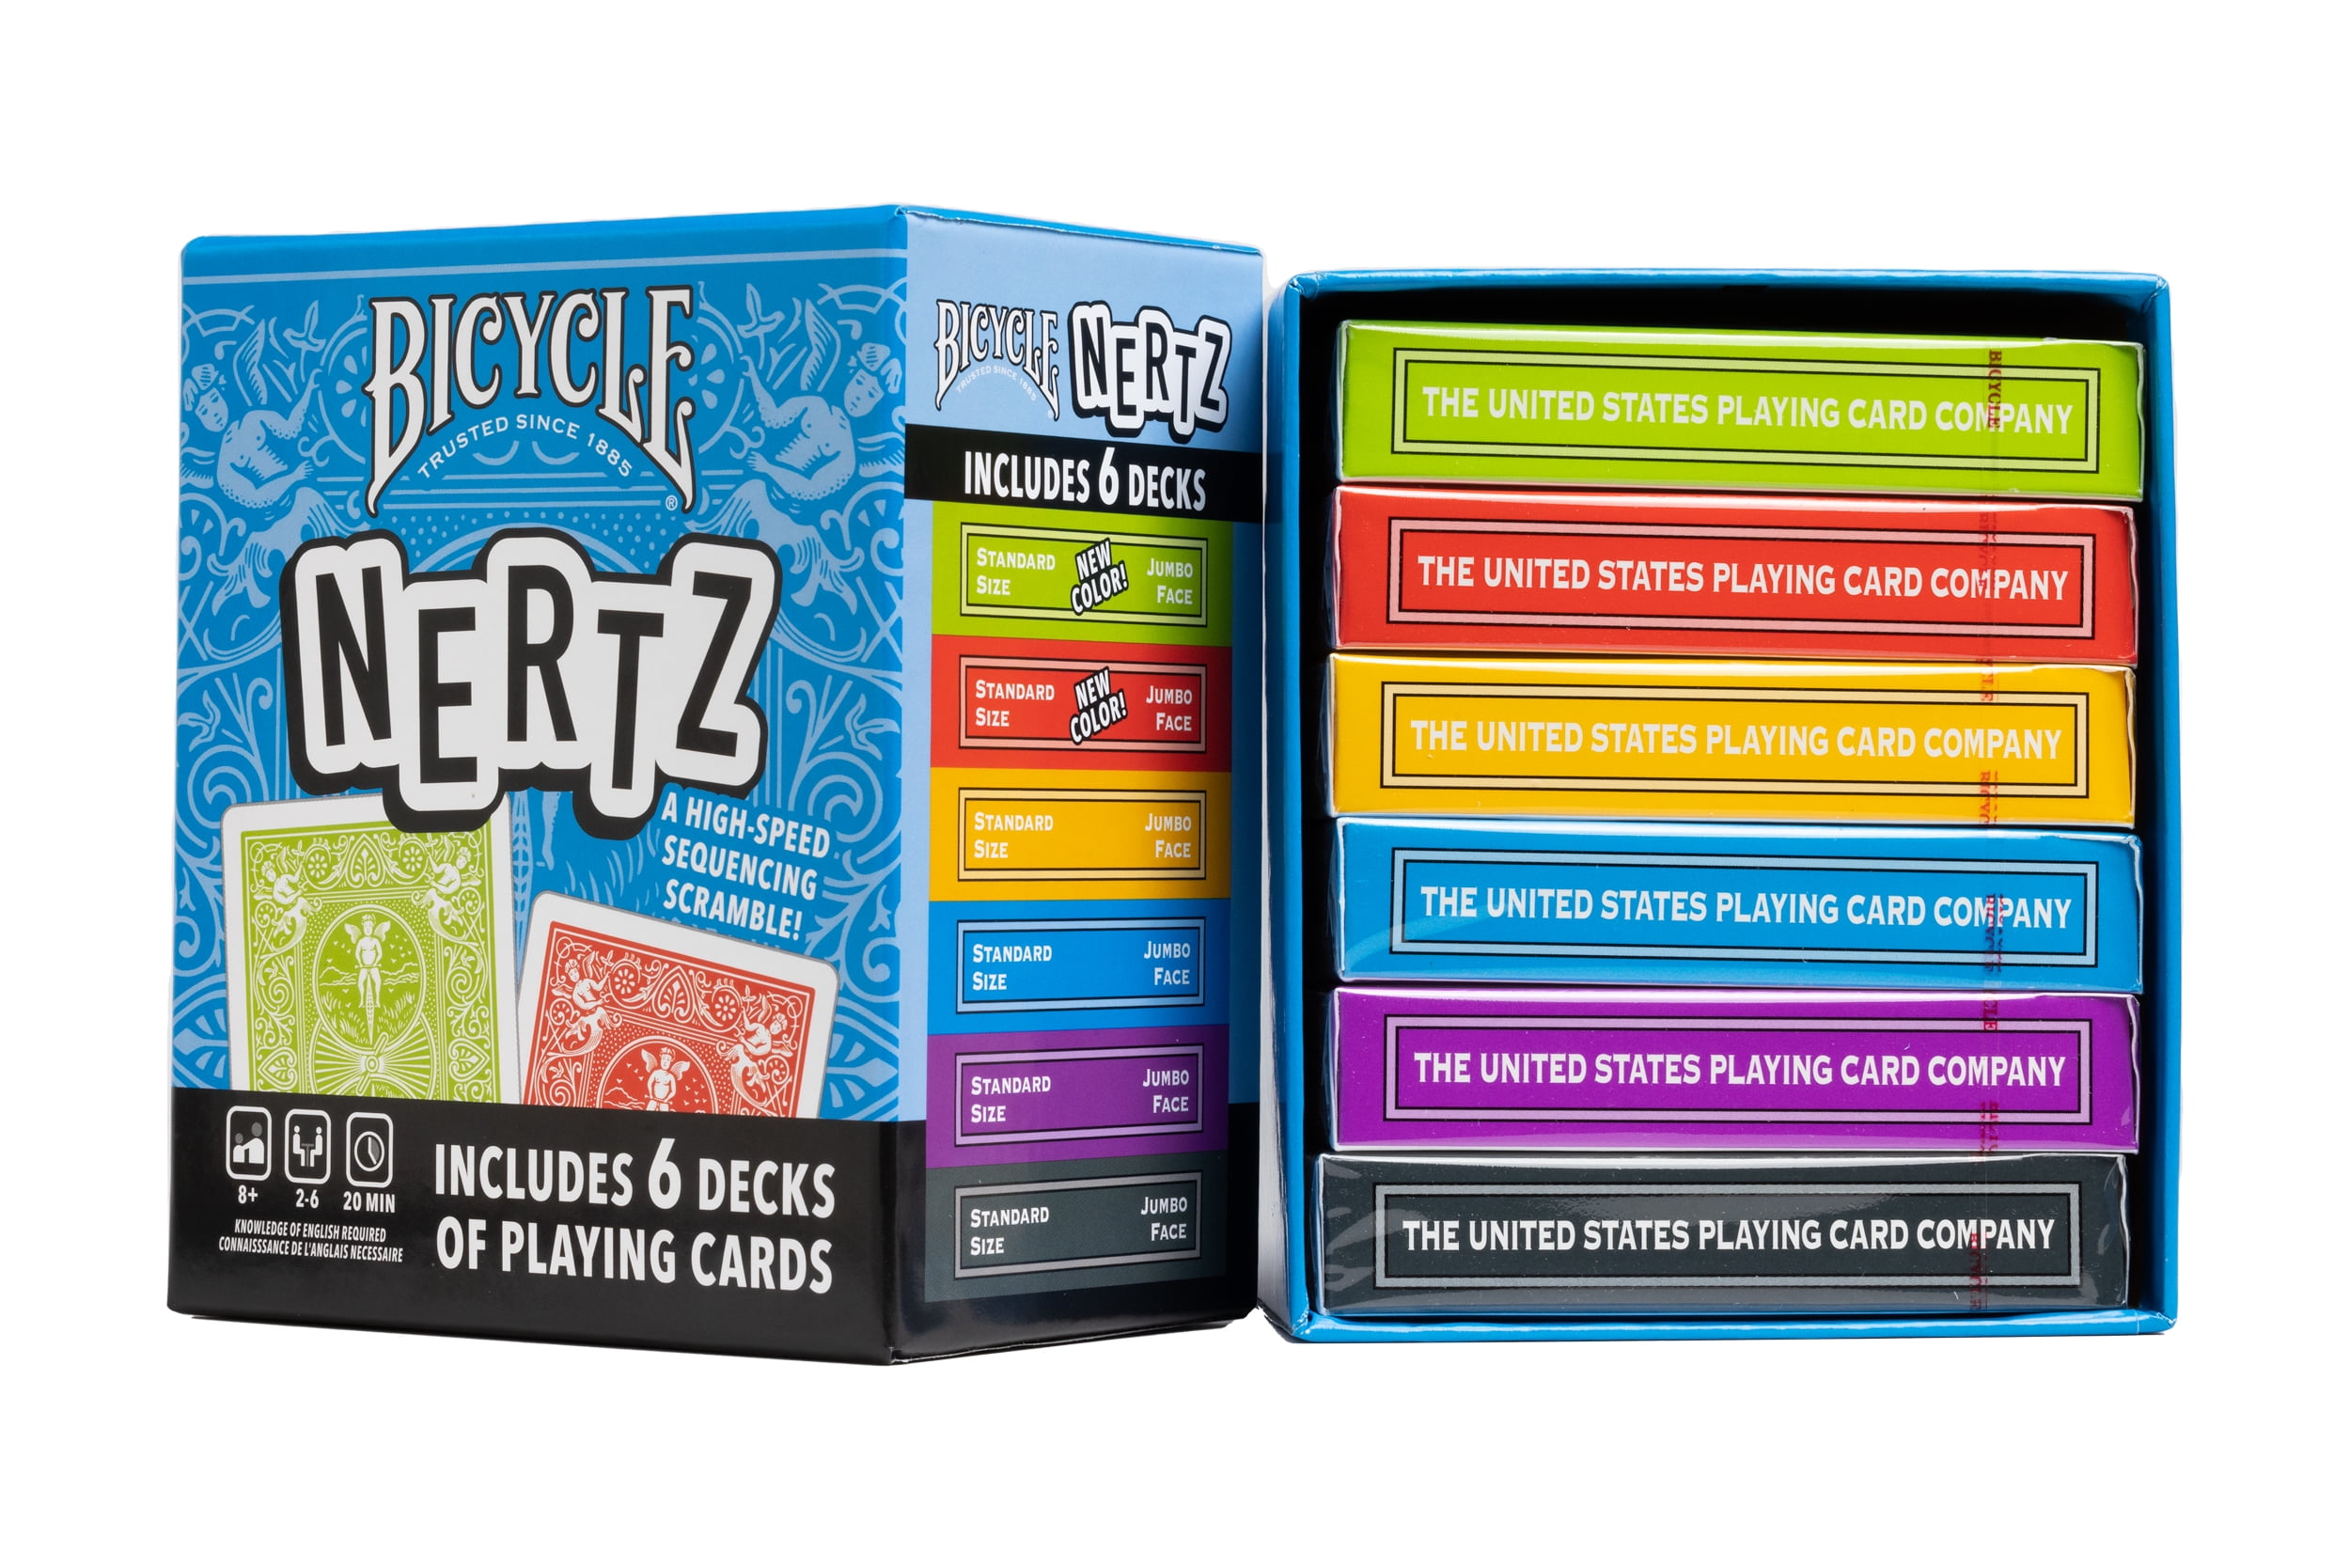 Bicycle Nertz Playing Card Game Up to Players